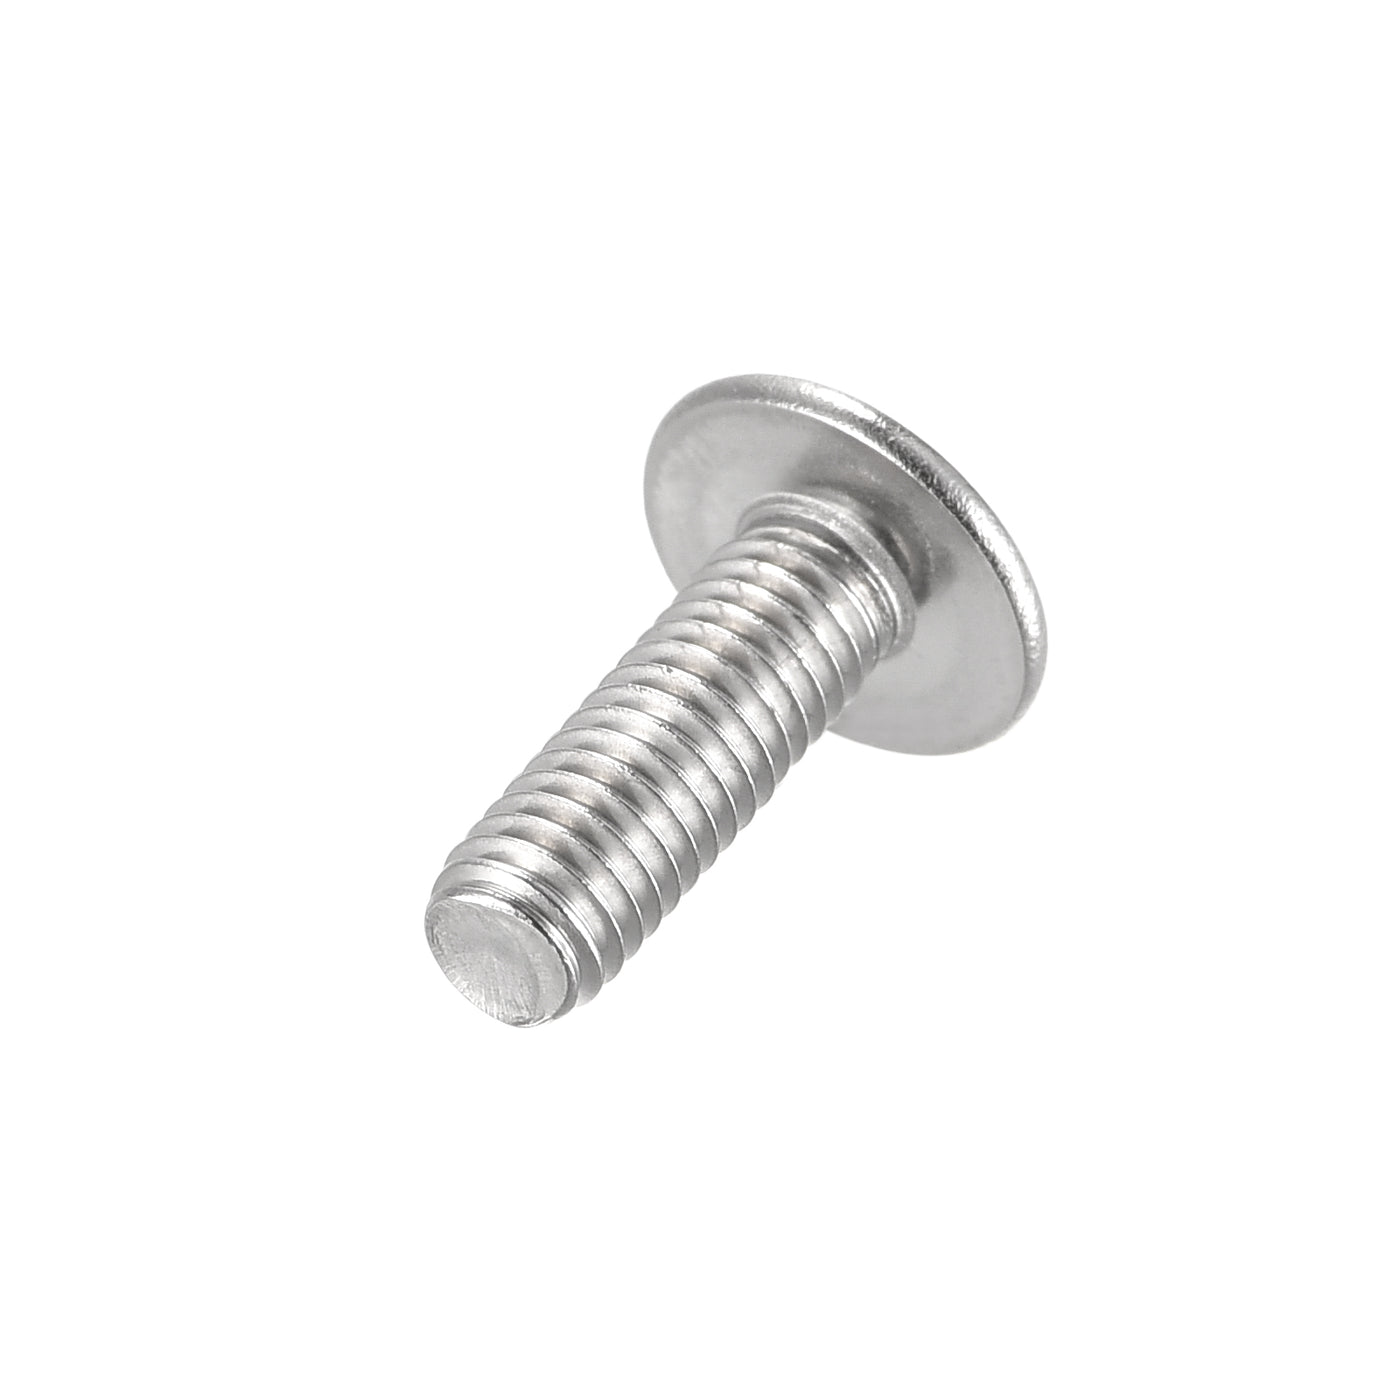 Uxcell Uxcell M5x40mm 304 Stainless Steel Flanged Button Head Socket Cap Screws 25pcs